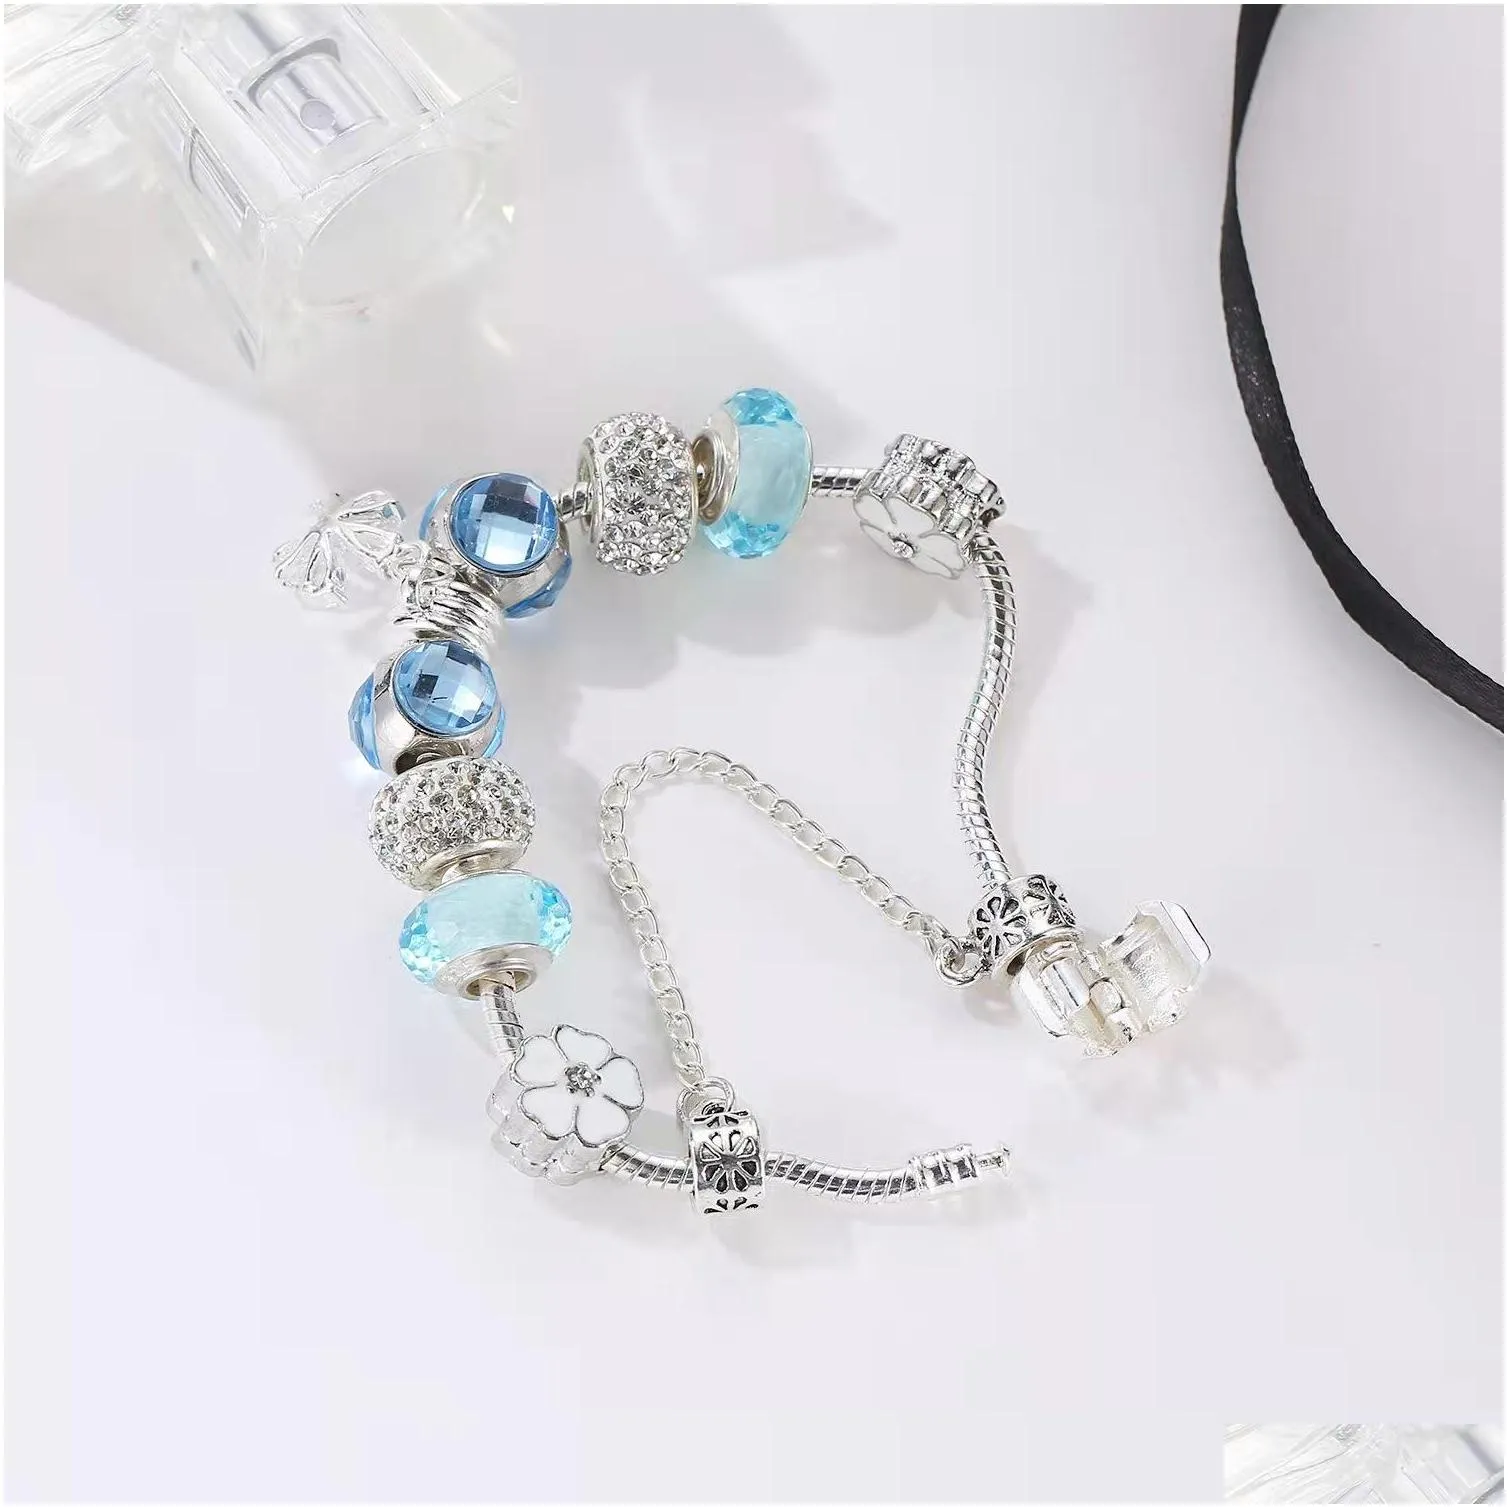 16 to 21cm light blue crystal charm bracelet oriental cherry charms beads fit bangle snake chain diy accessories jewelry as valentine gift with box or nylon